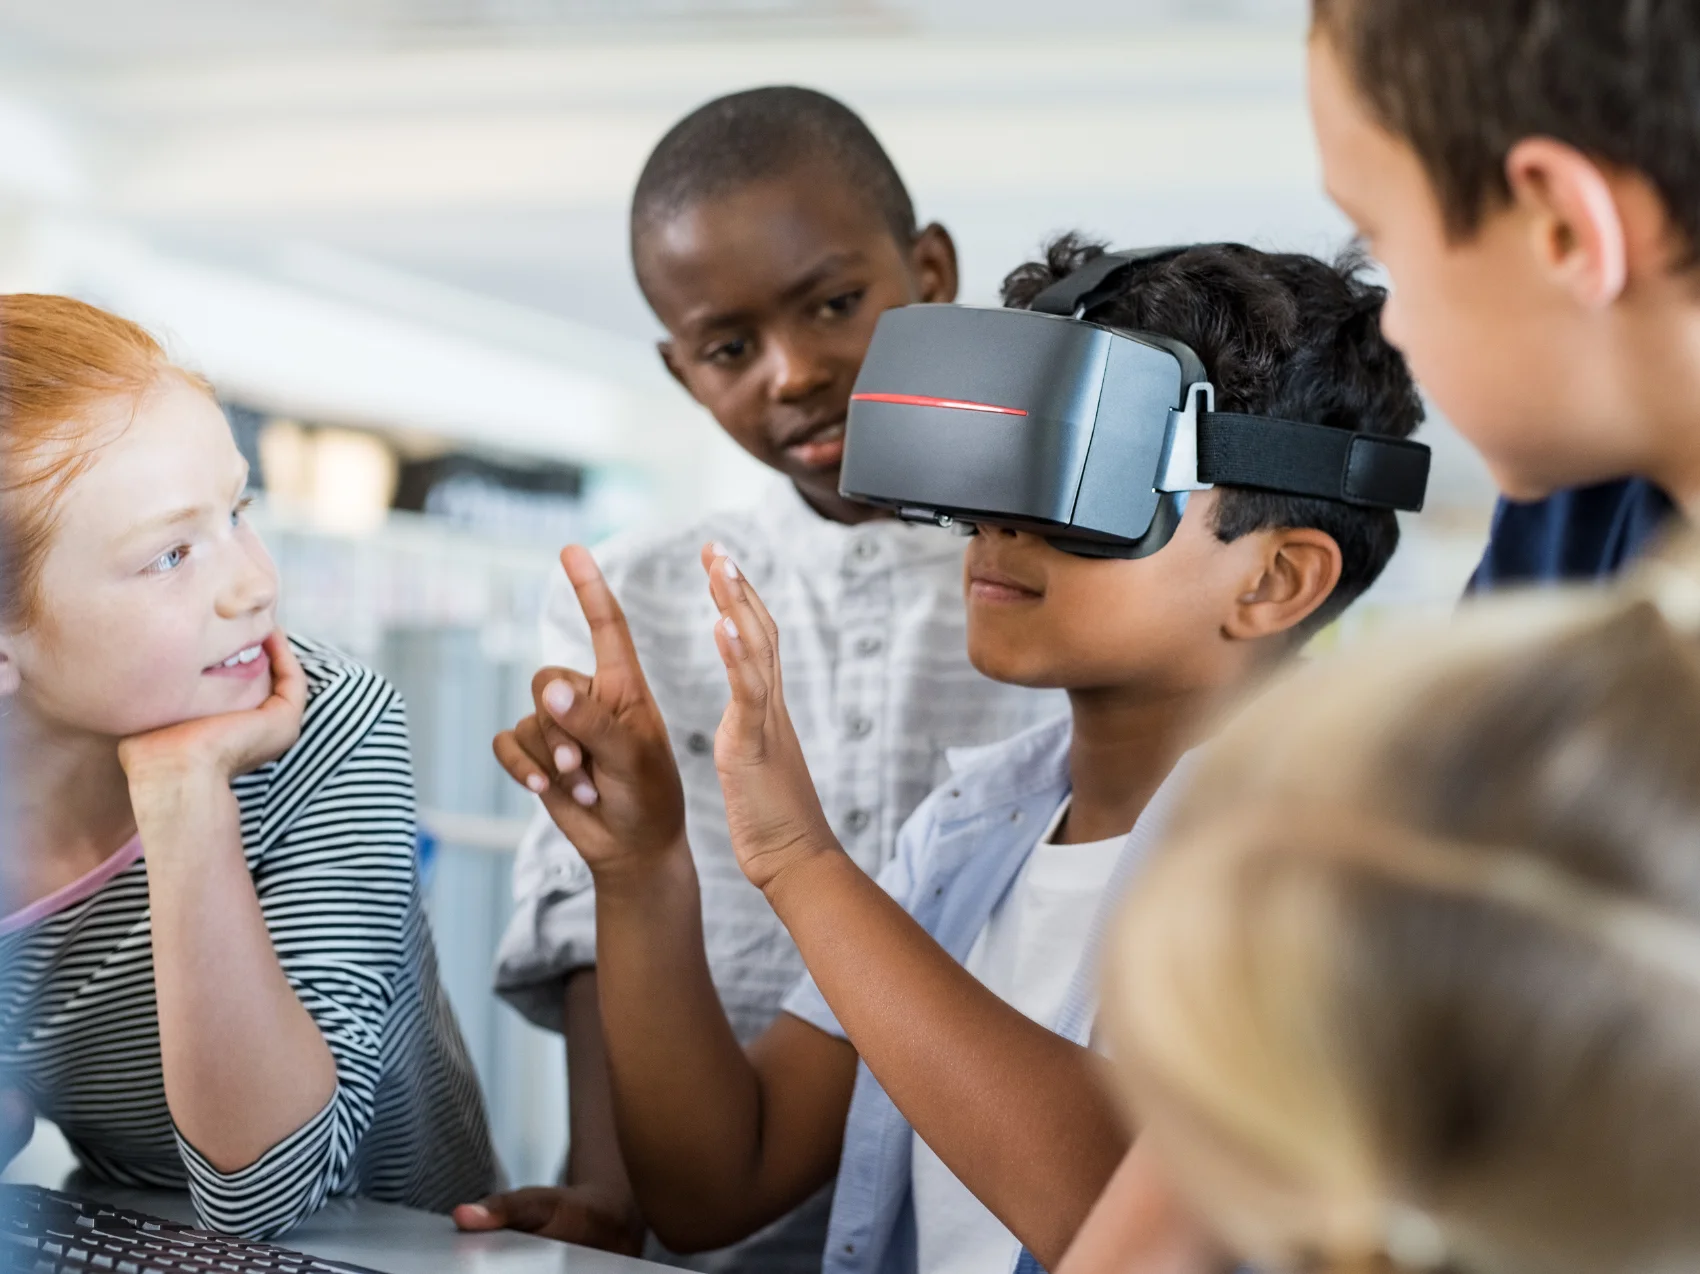 A primary school child uses a virtual reality headset with other children around them